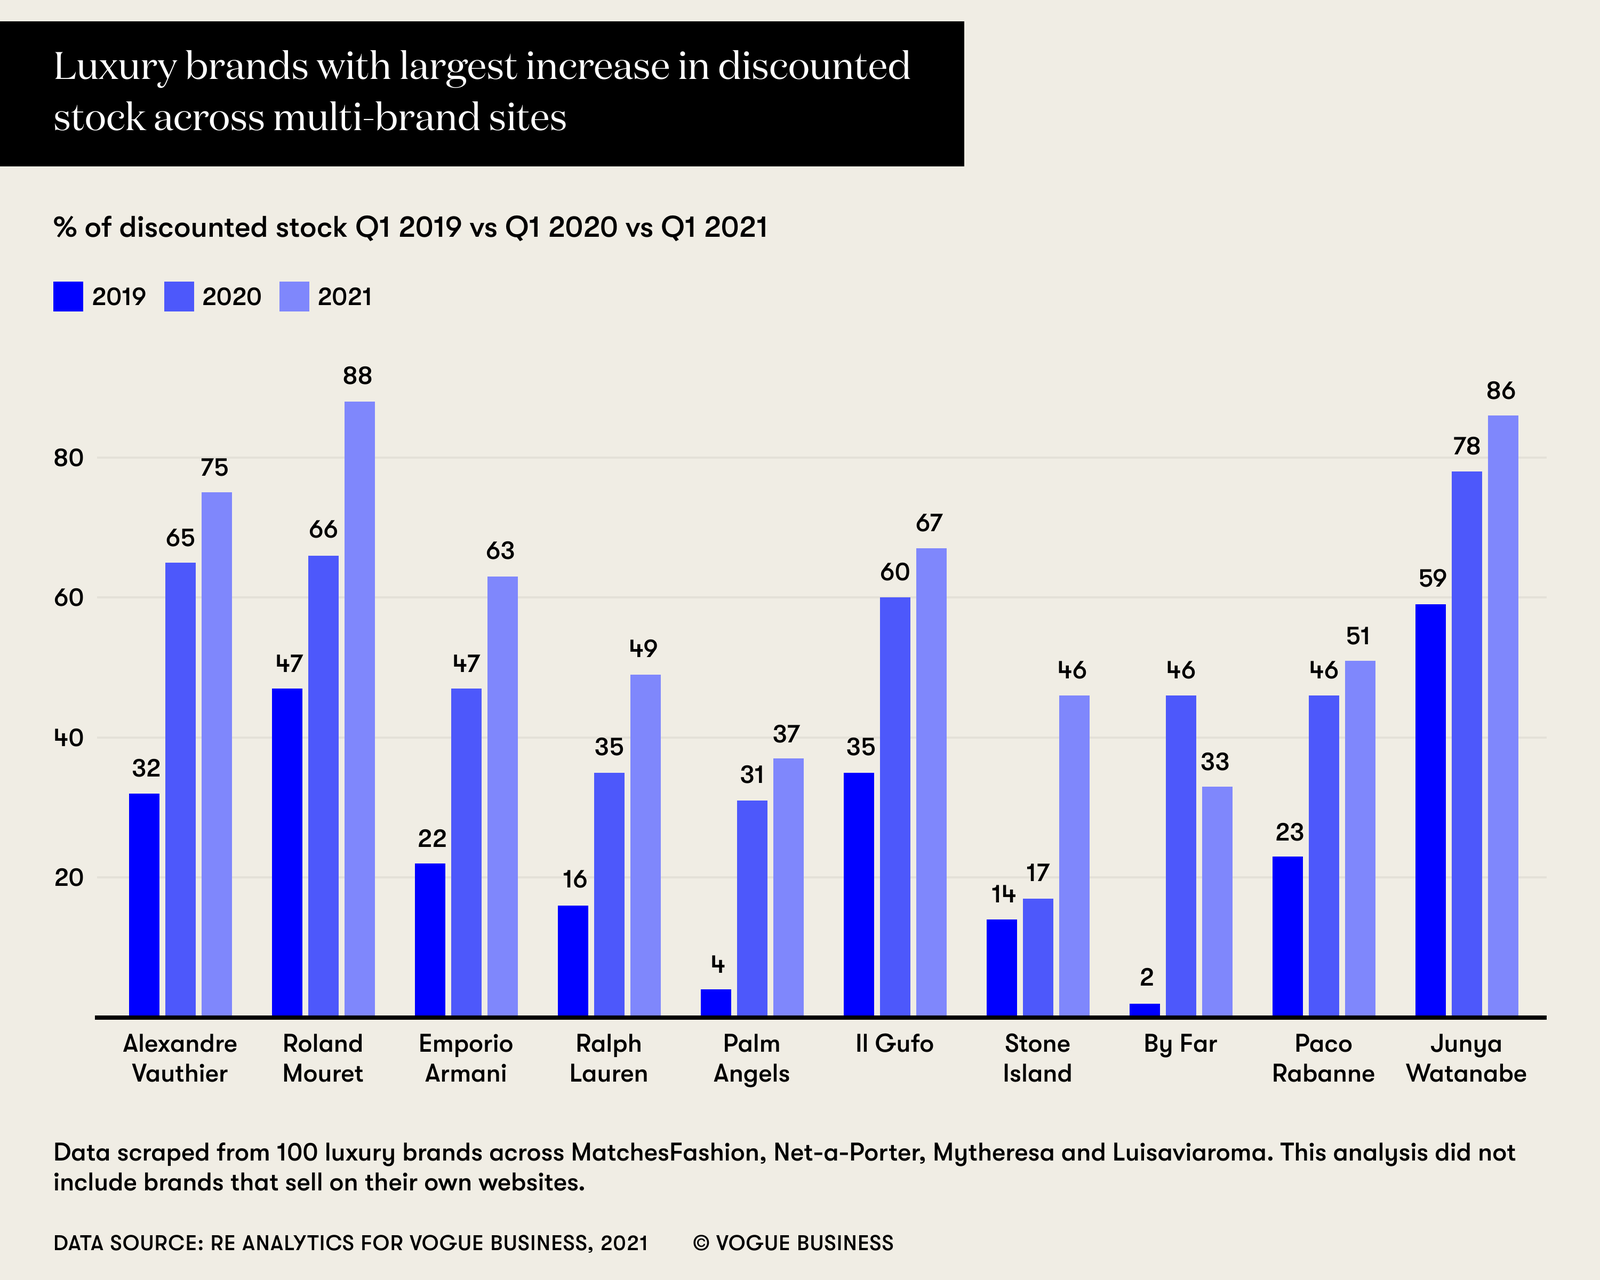 Luxury brands with largest increase in discounted stock across multi brand sites